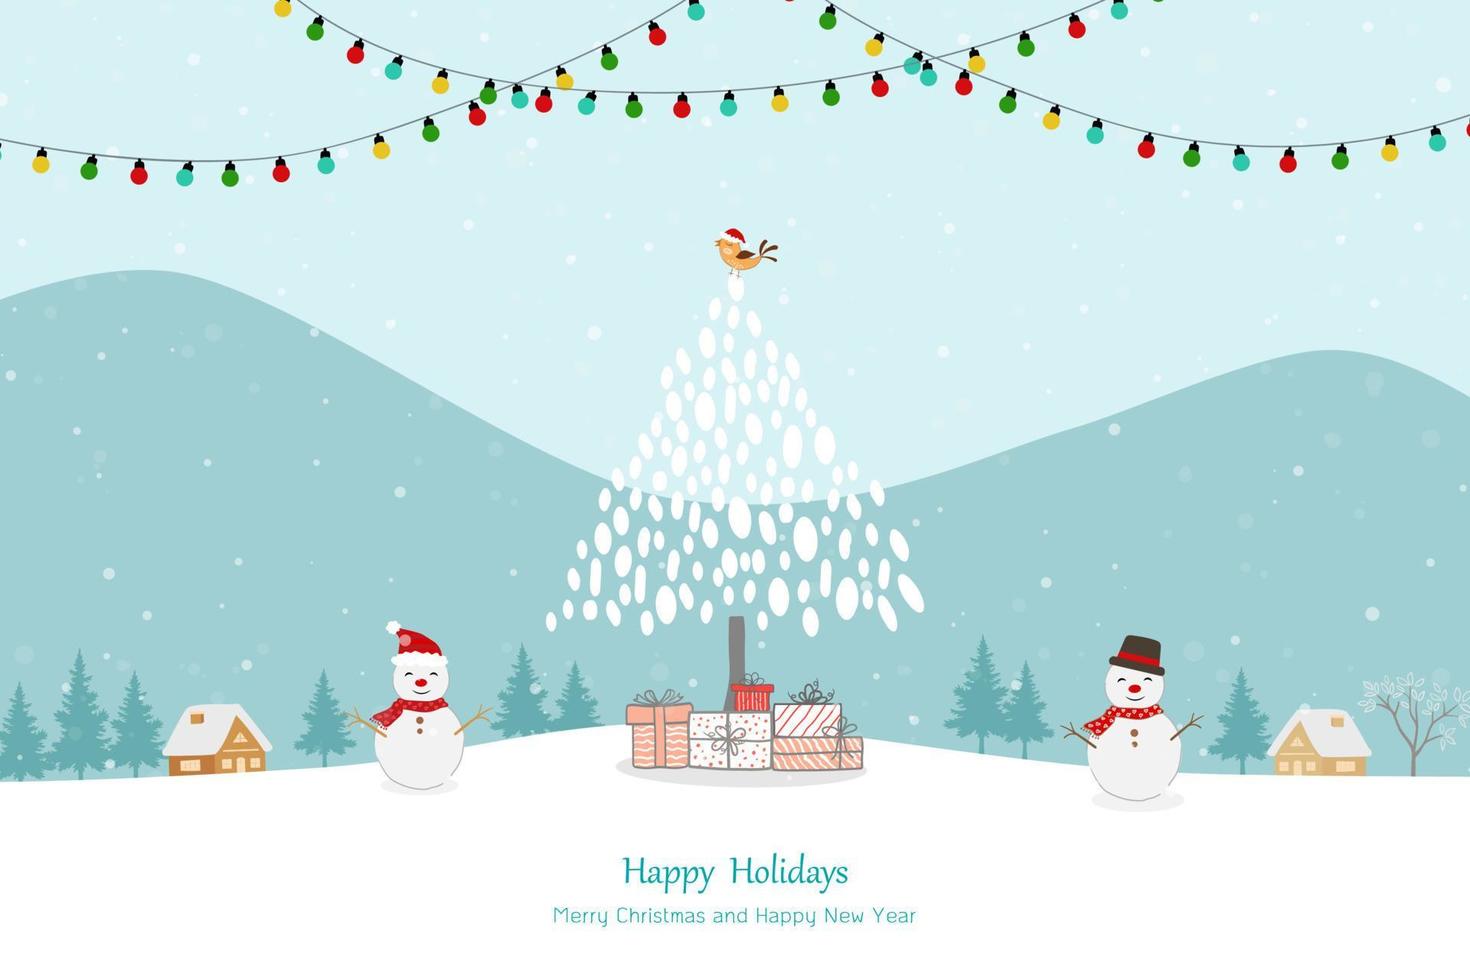 Merry Christmas and Happy New Year greeting card on winter background for happy holiday,decorative or celebrate party vector